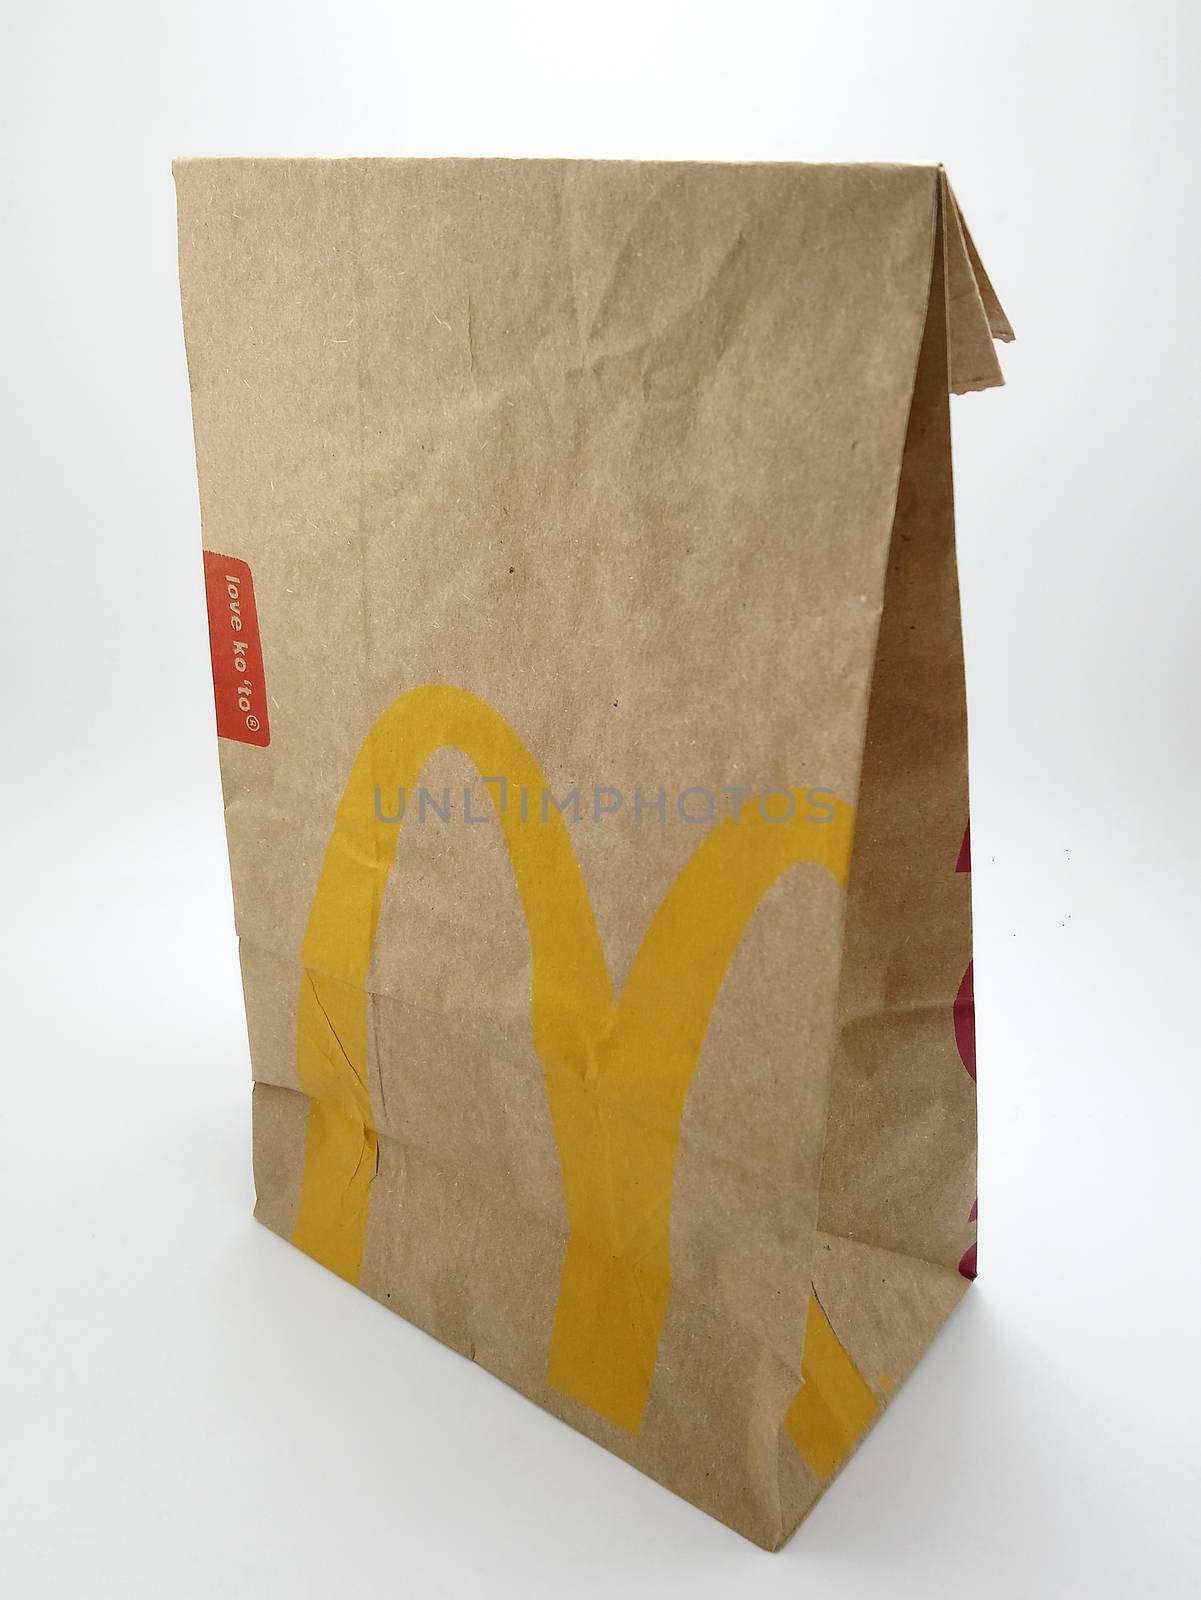 Mcdonalds brown paper bag in Manila, Philippines by imwaltersy